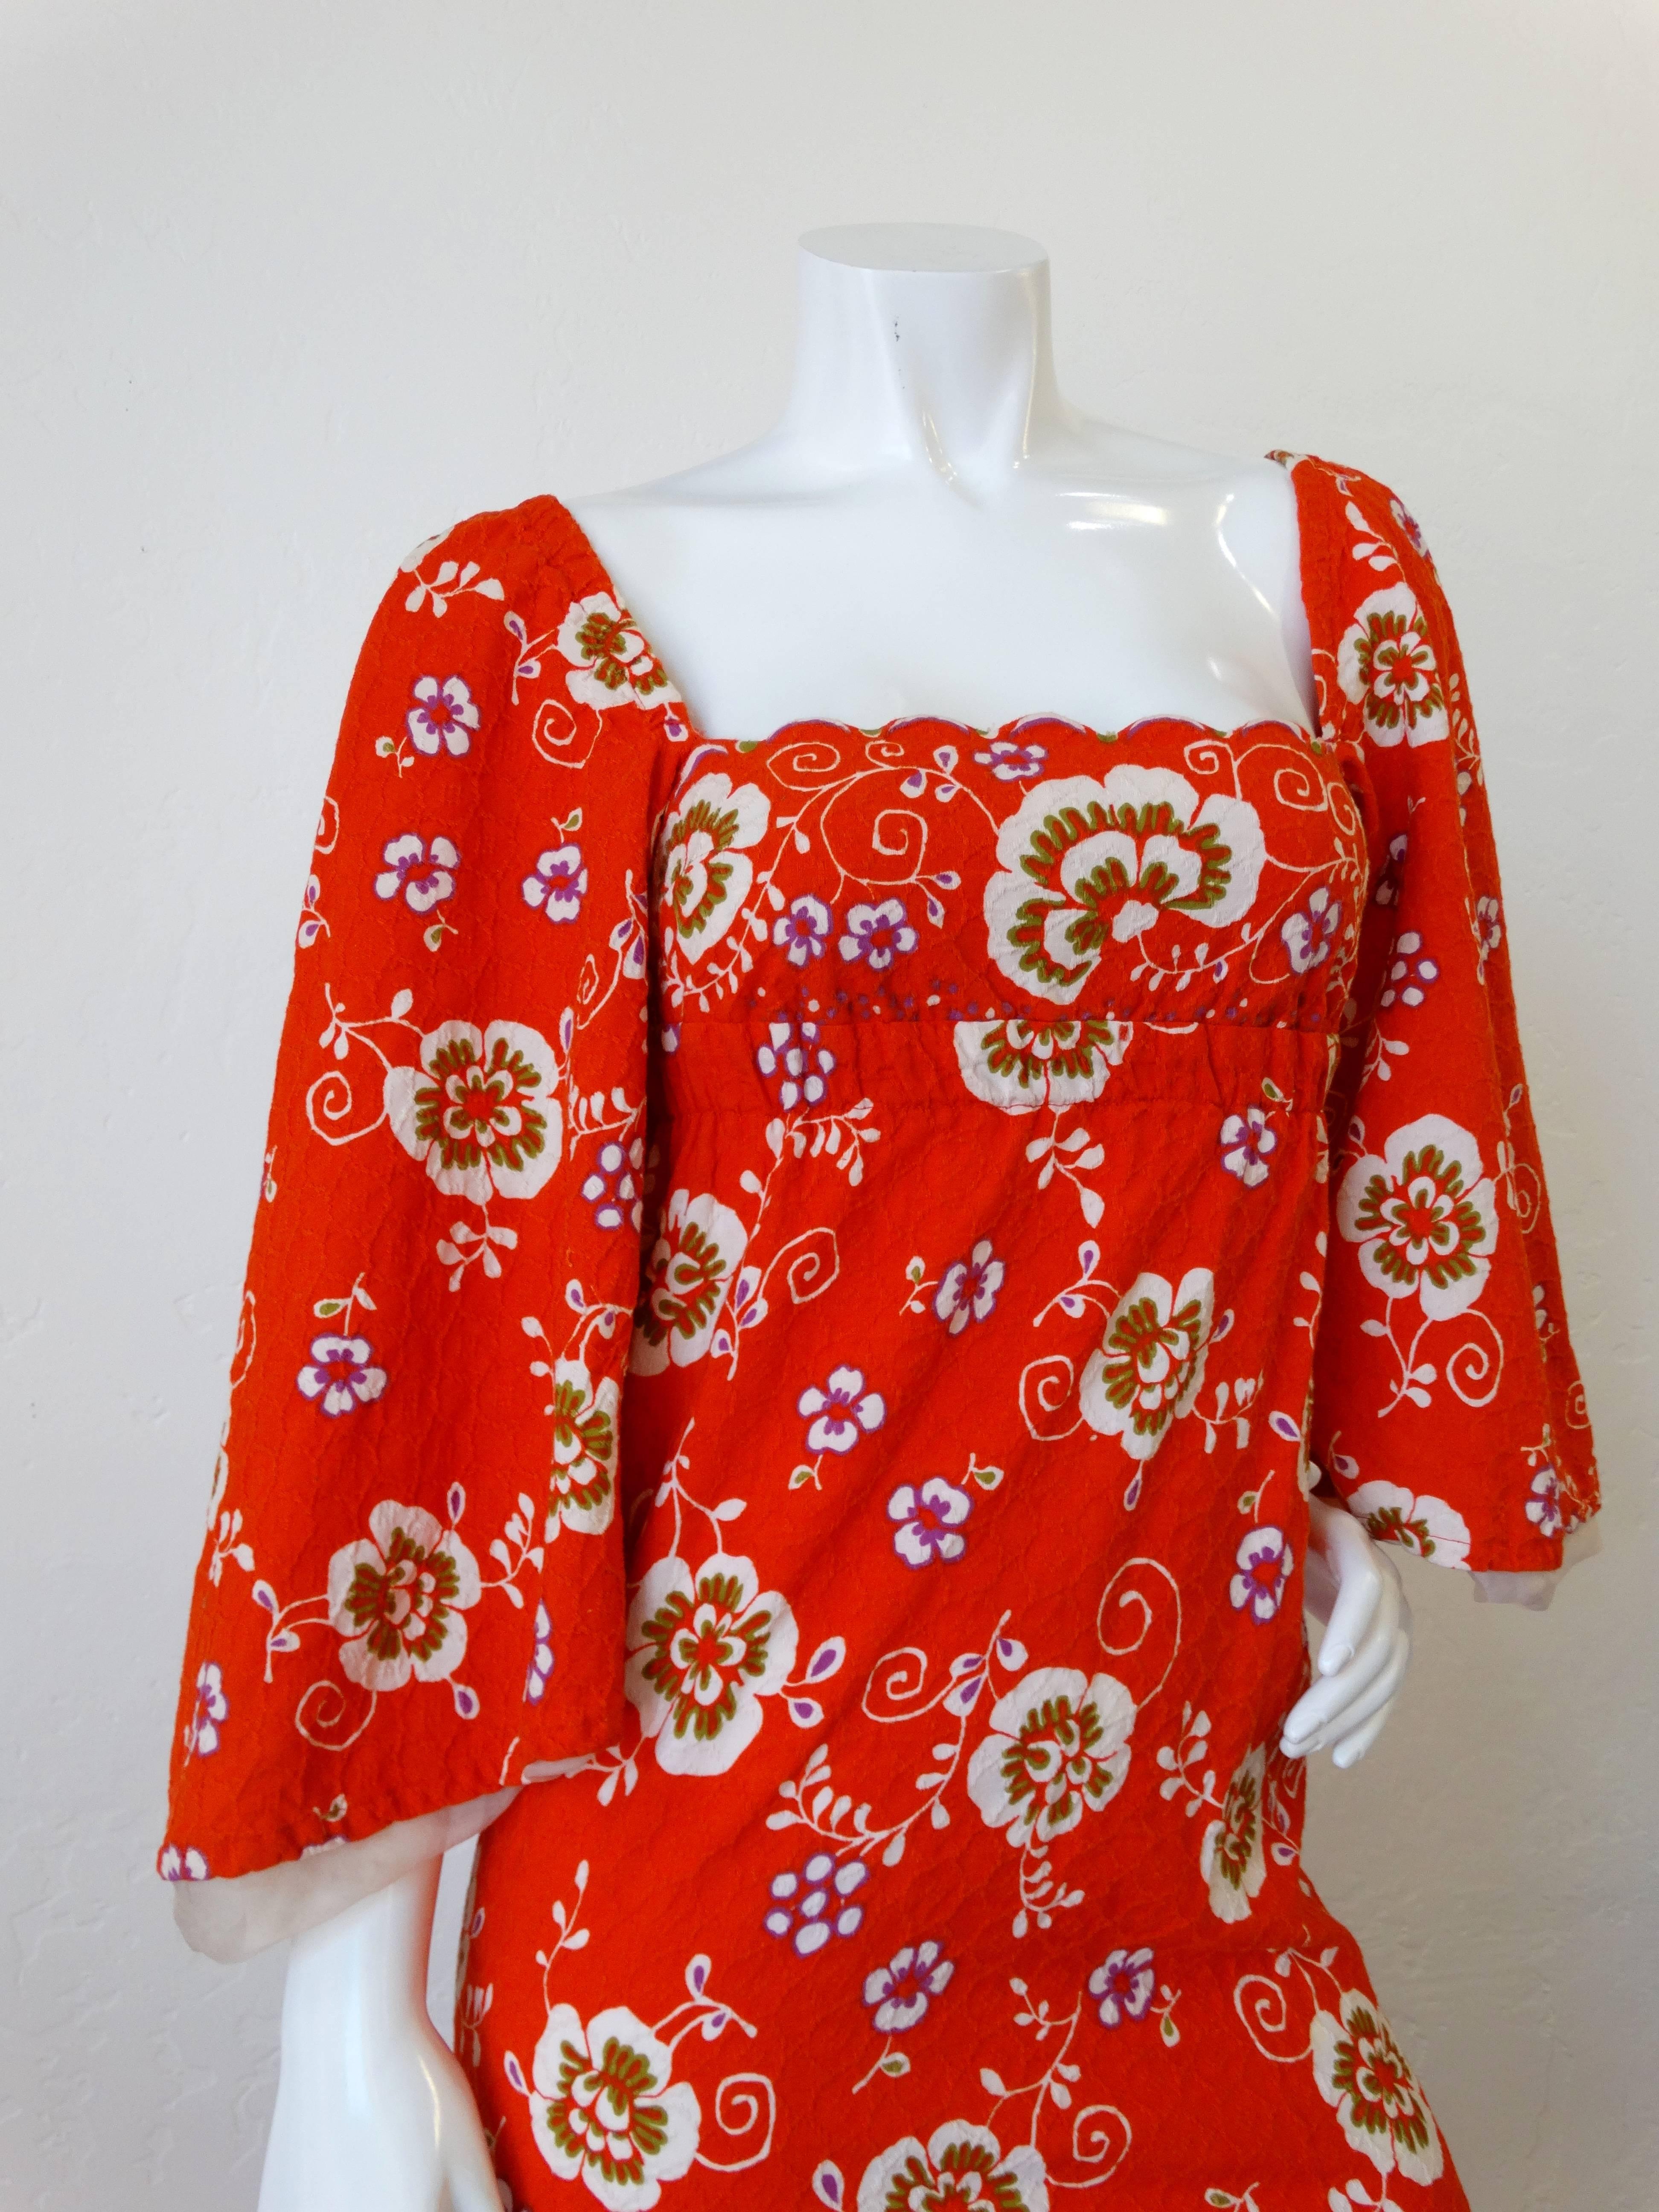 Fabulous 1970s Betty Carol for Christopher Jones bell sleeve maxi dress! Burnt orange, white, purple and green graphic floral print. Elasticized sleeves can be worn on and off the shoulder. Flattering square neckline with scalloped edges. Textured